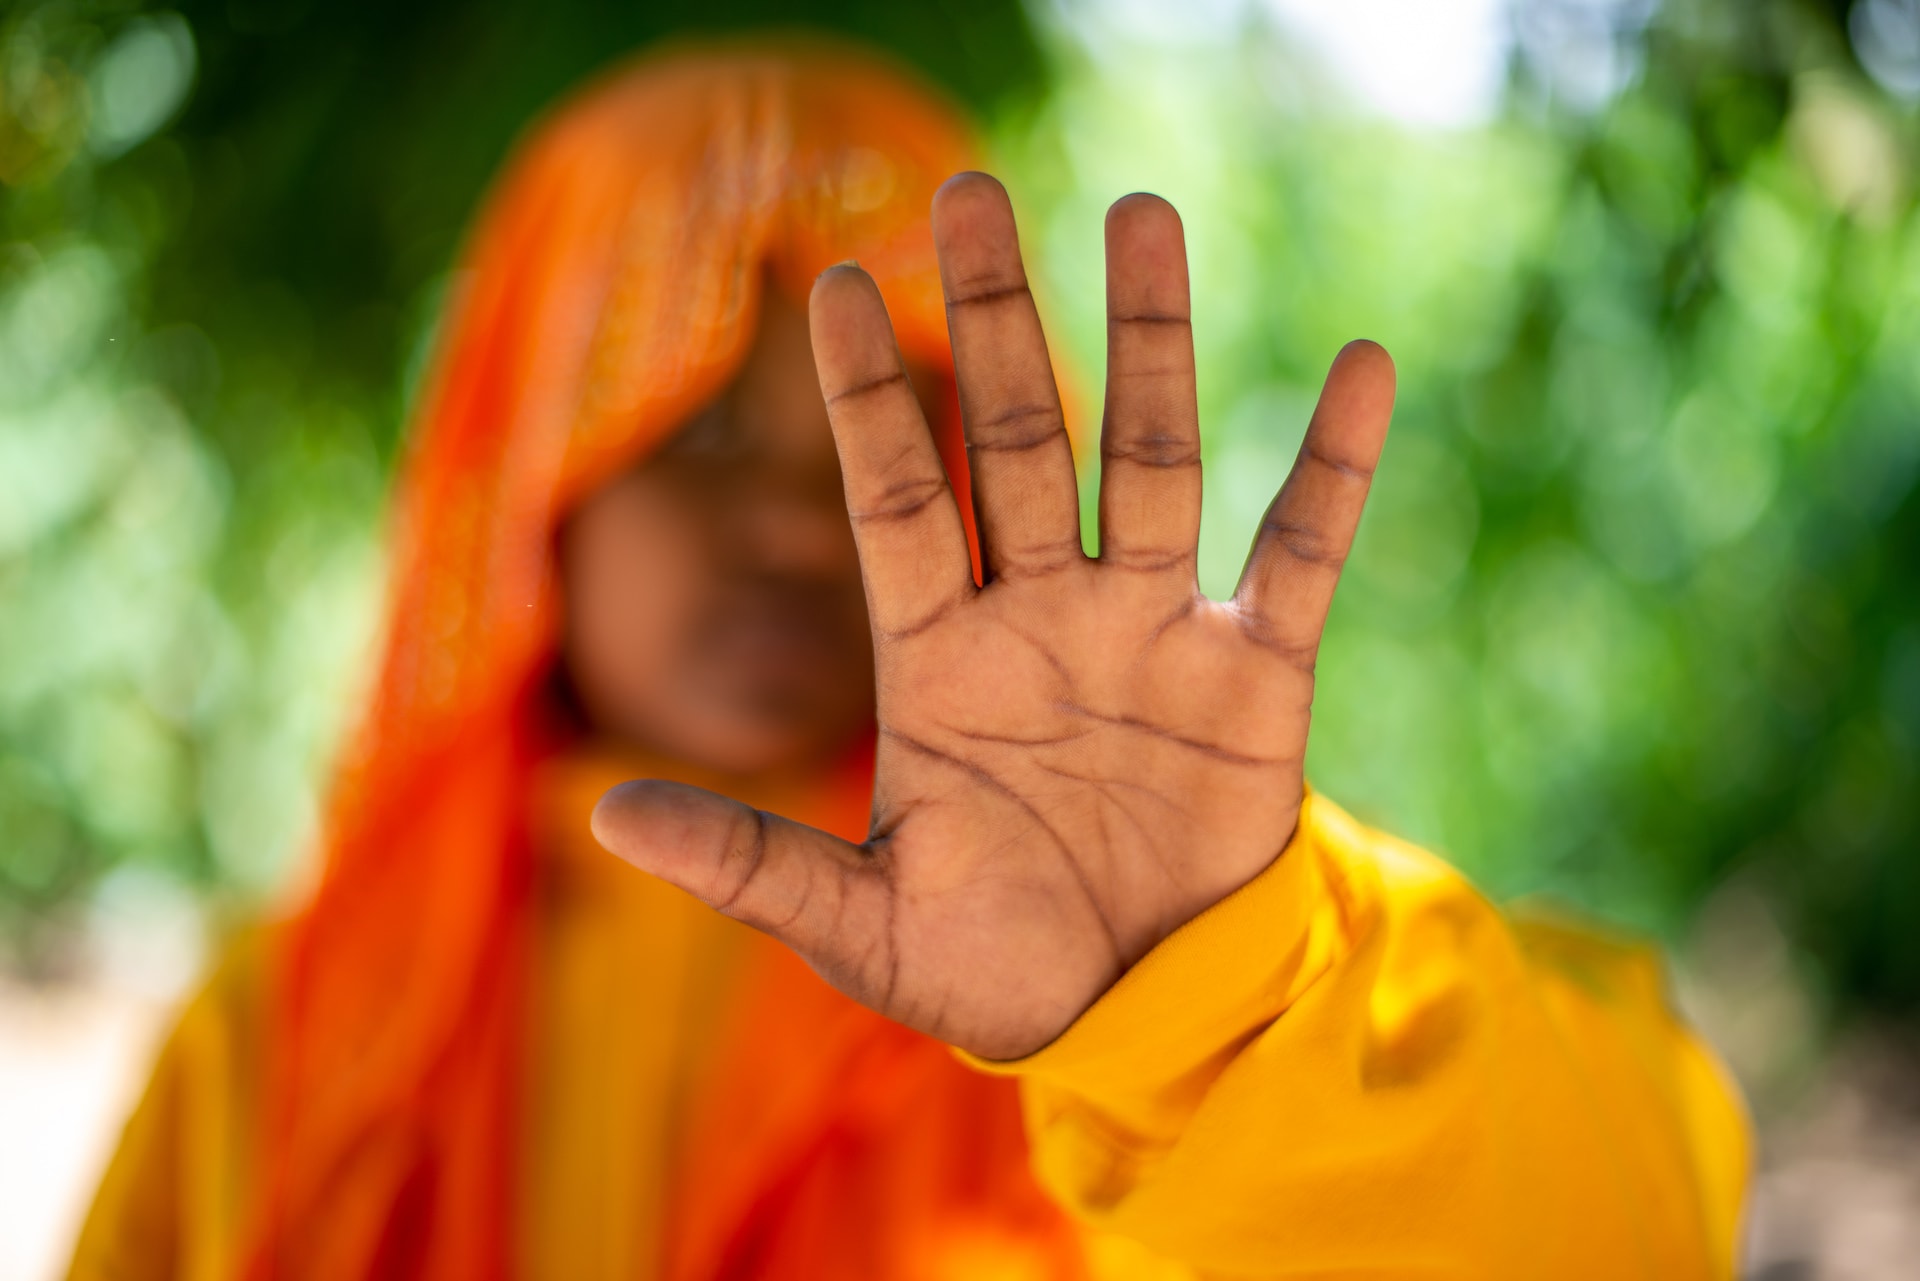 Sarah is wearing a yellow dress and an orange head covering. Her hand is stretched out toward the camera.